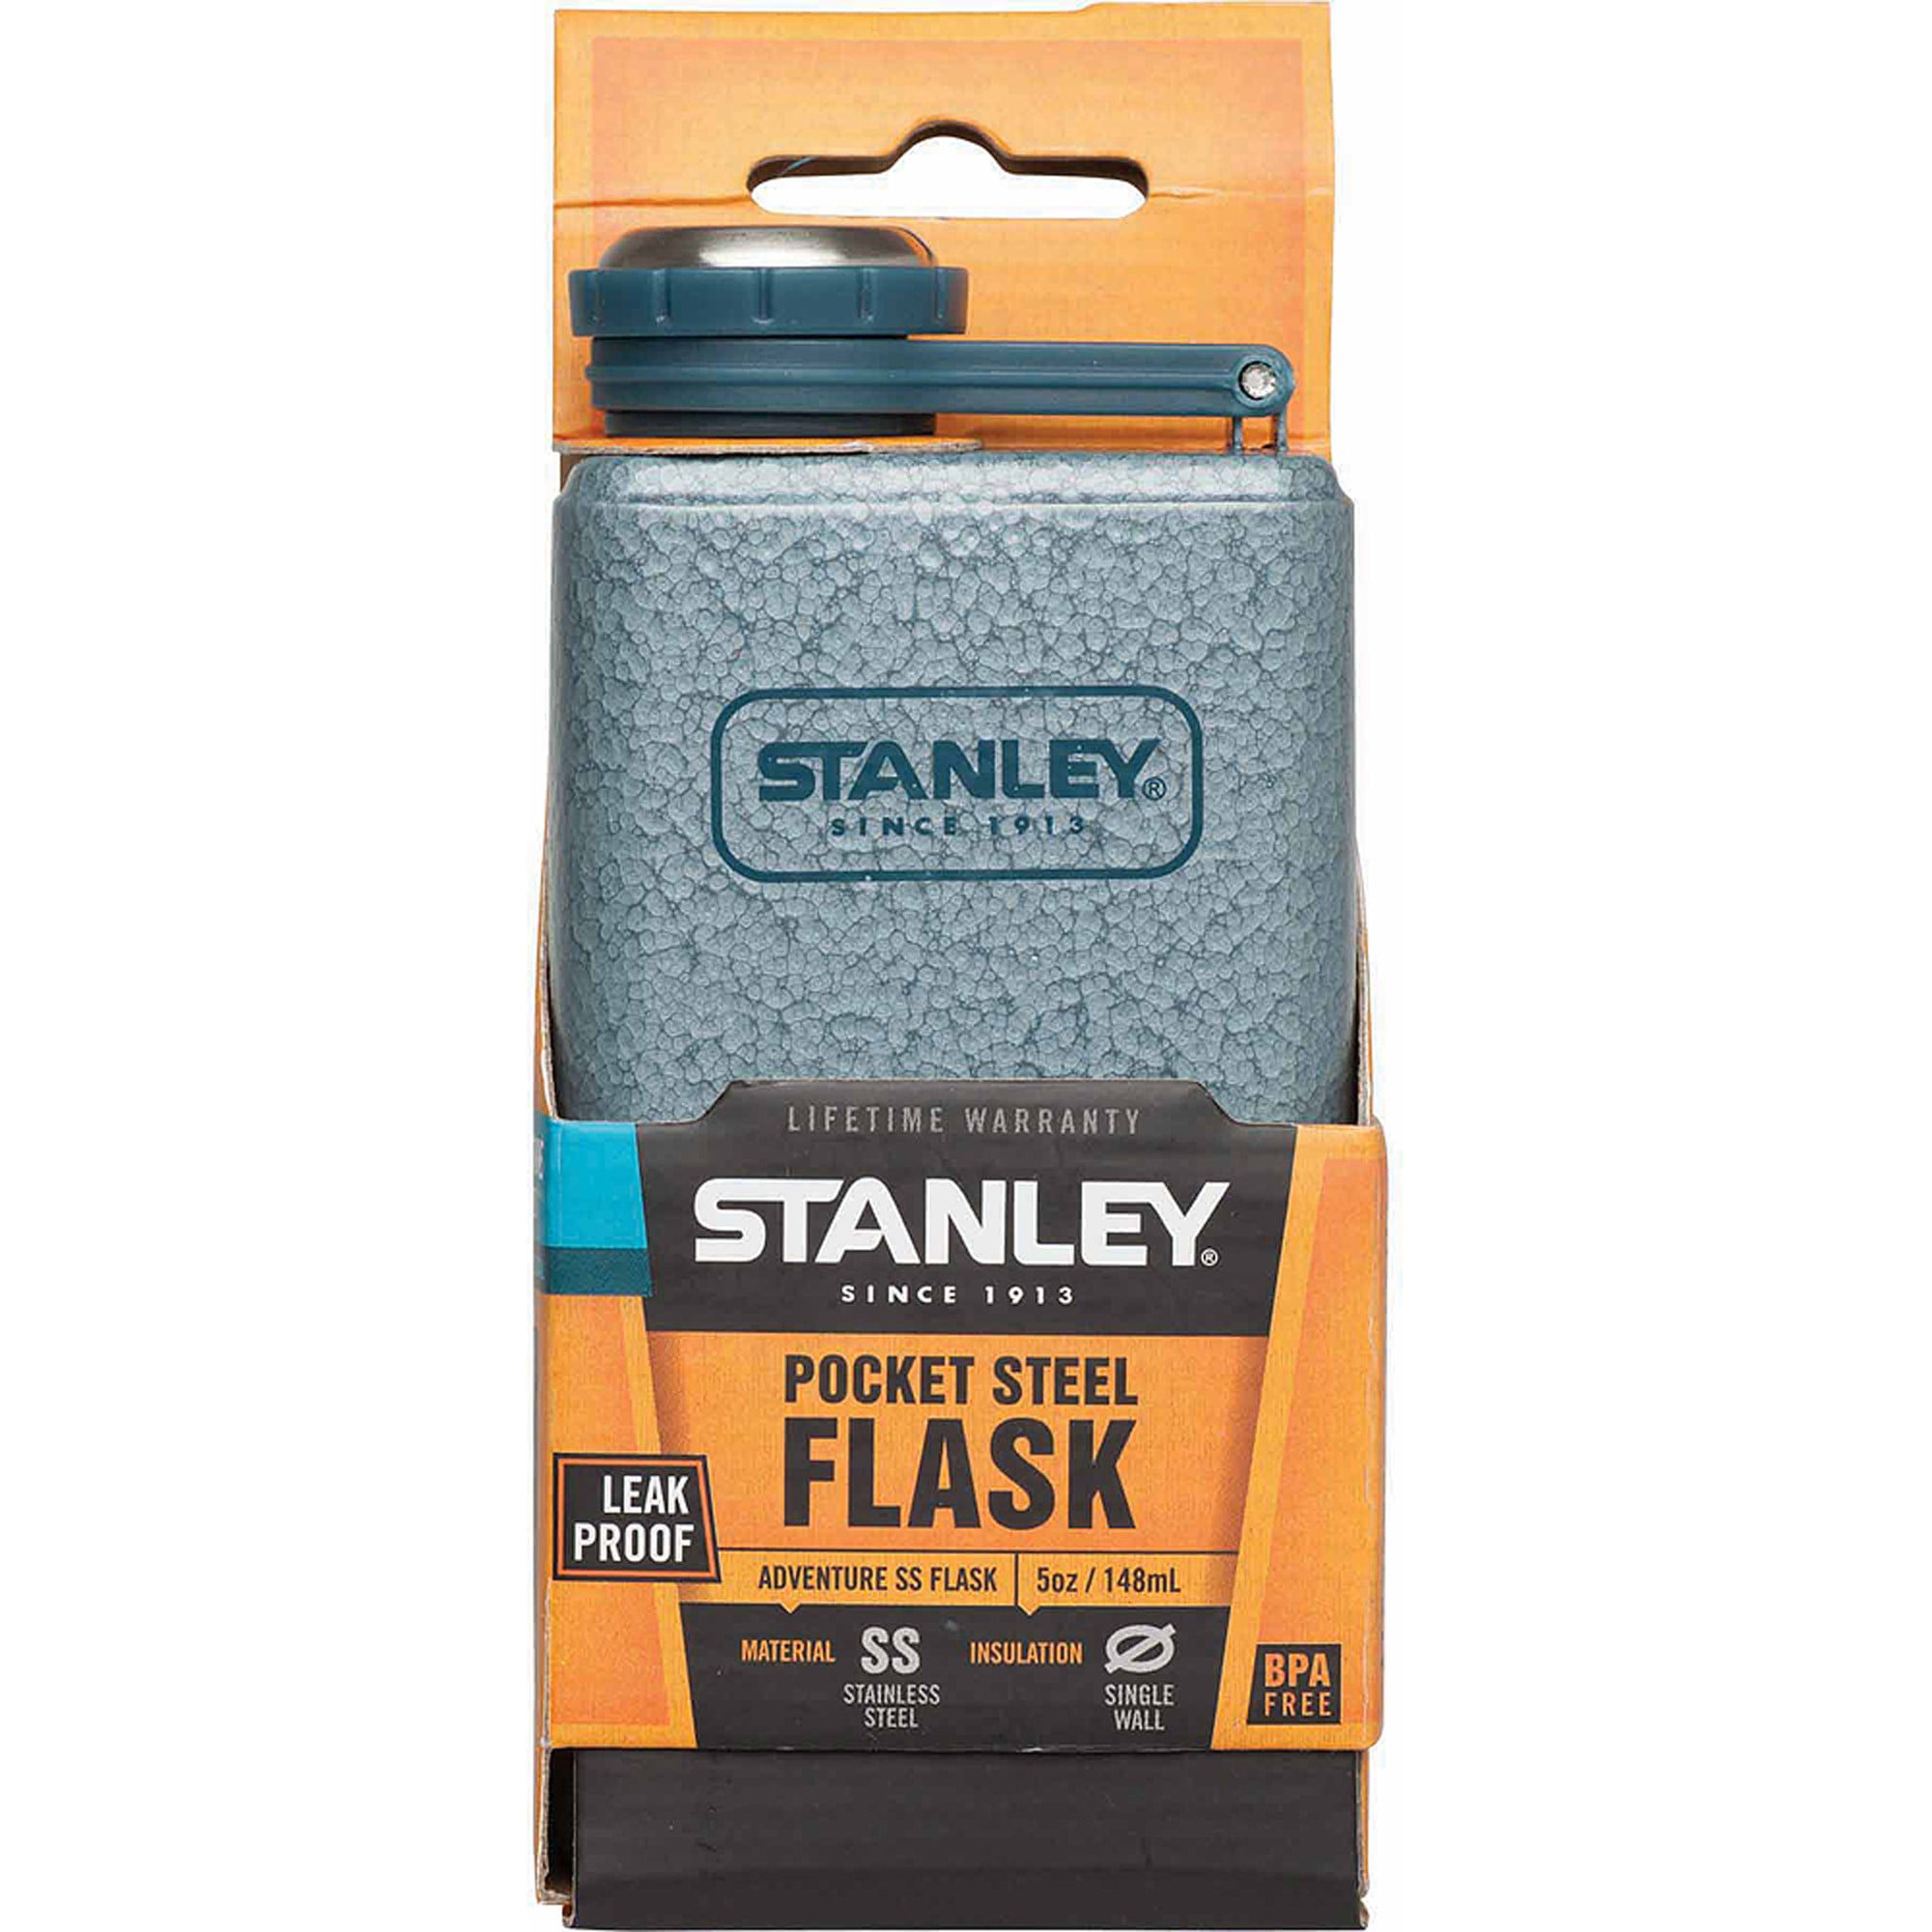 Stanley Tools Adventure Stainless Steel Flask - 12oz — CampSaver